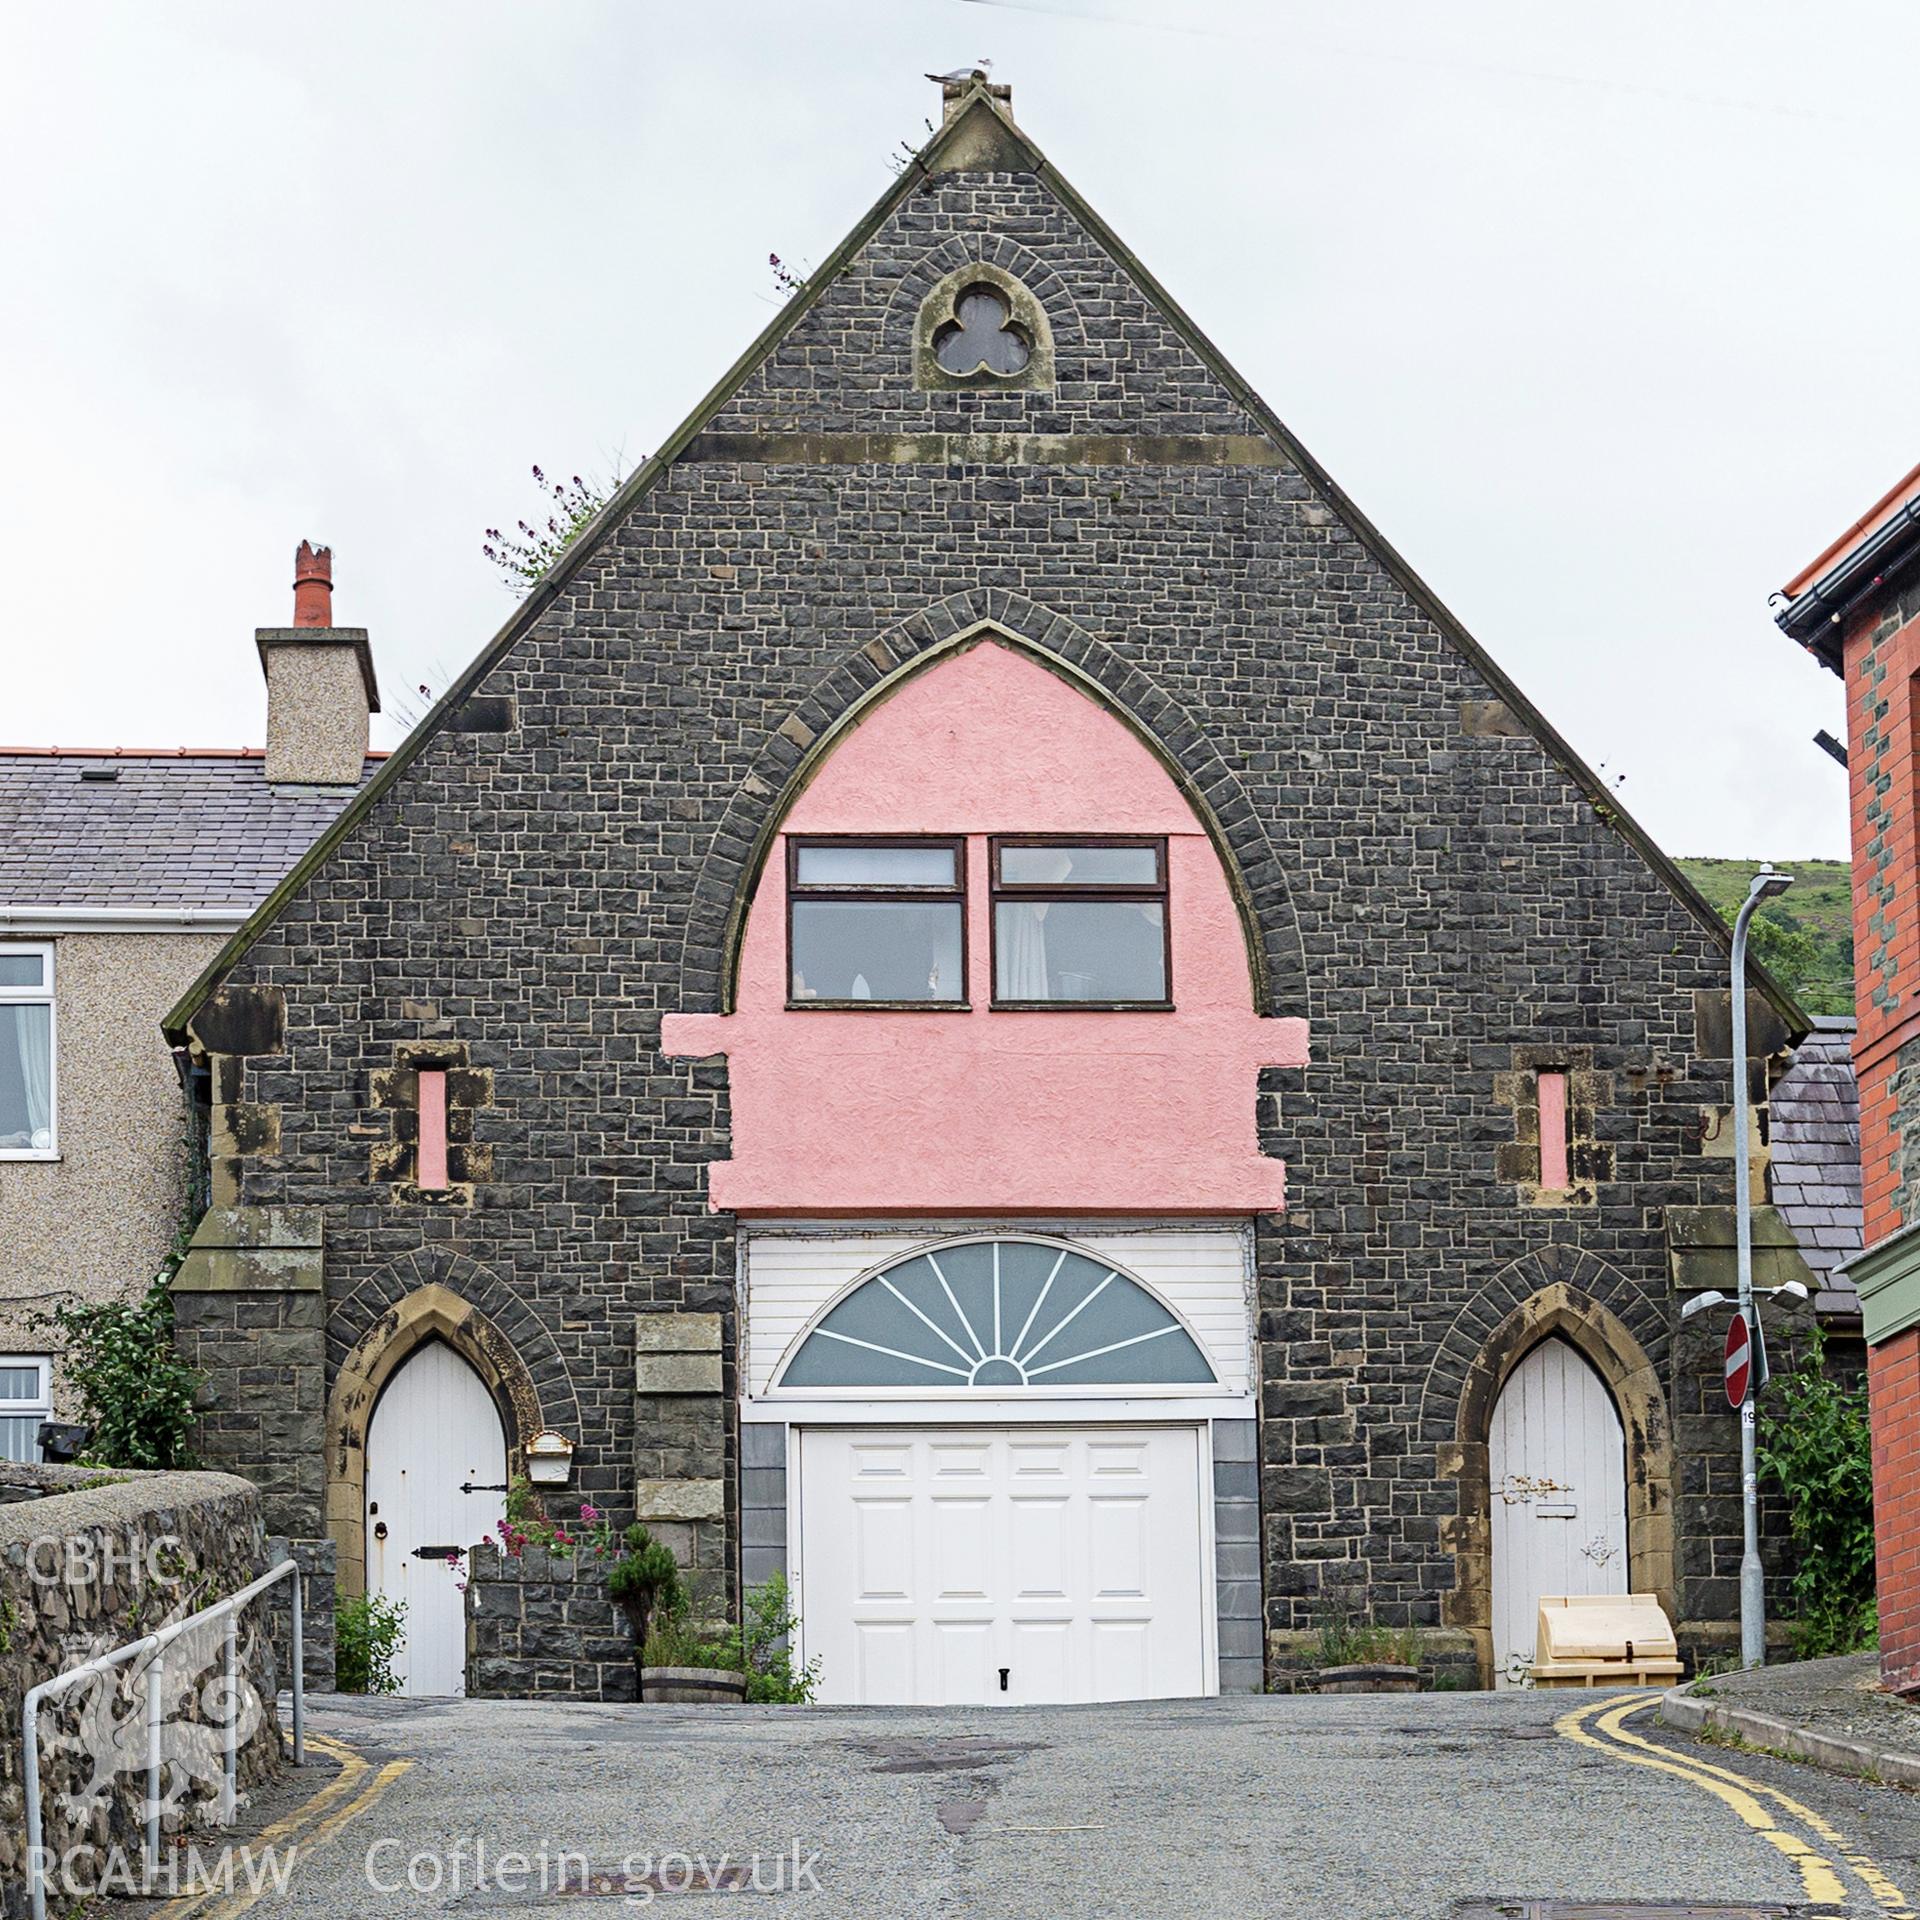 Colour photograph showing front elevation and entrance of the Calvinistic Methodist Chapel on Chapel Street, Penmaenmawr. Photographed by Richard Barrett on 15th June 2018.